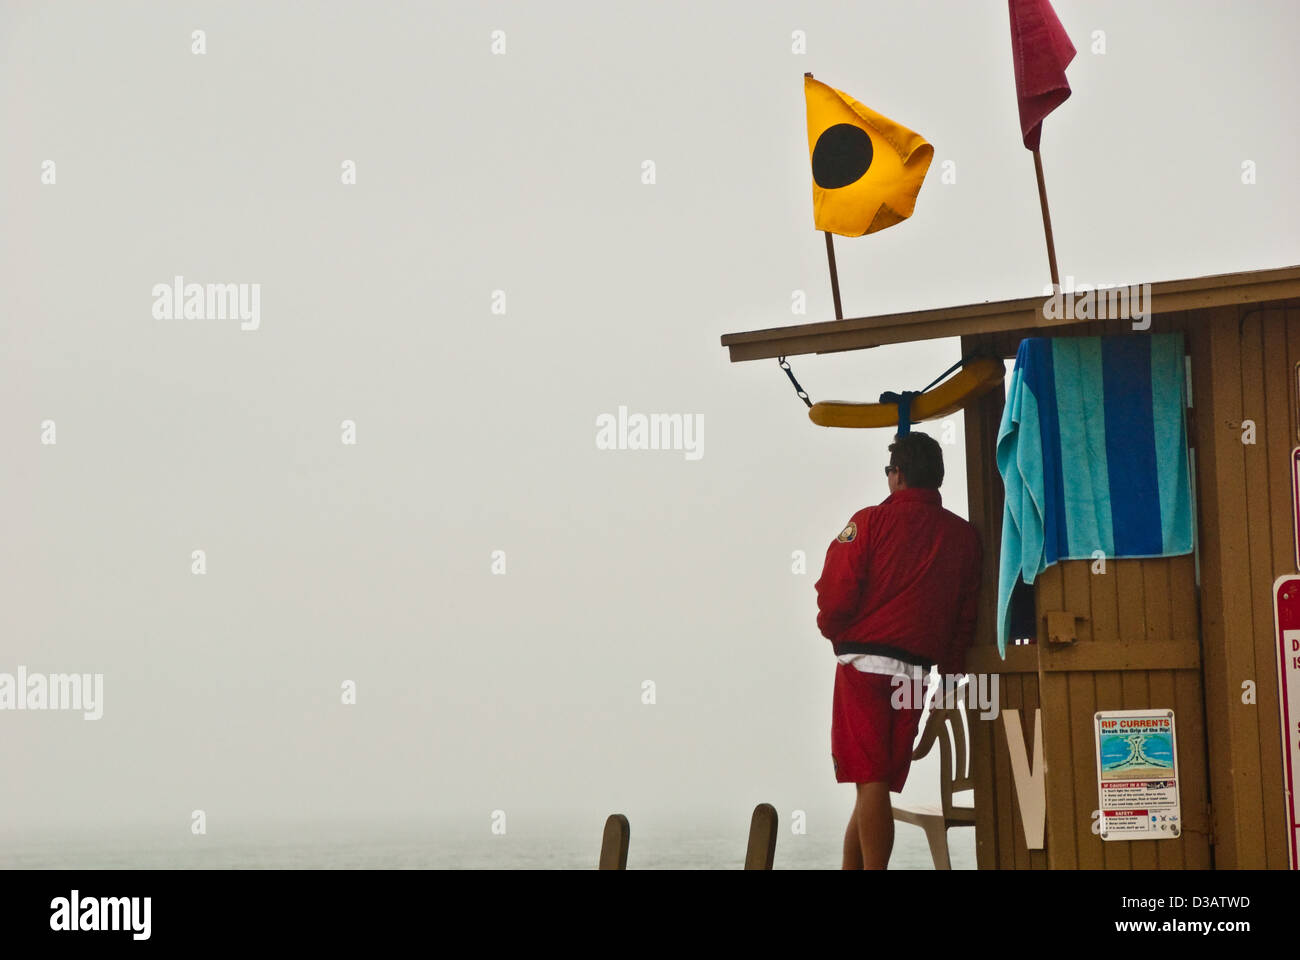 Lifeguard at The Wedge in Newport Beach on a foggy California morning. The Blackball flag indicates bodysurfing only. Stock Photo